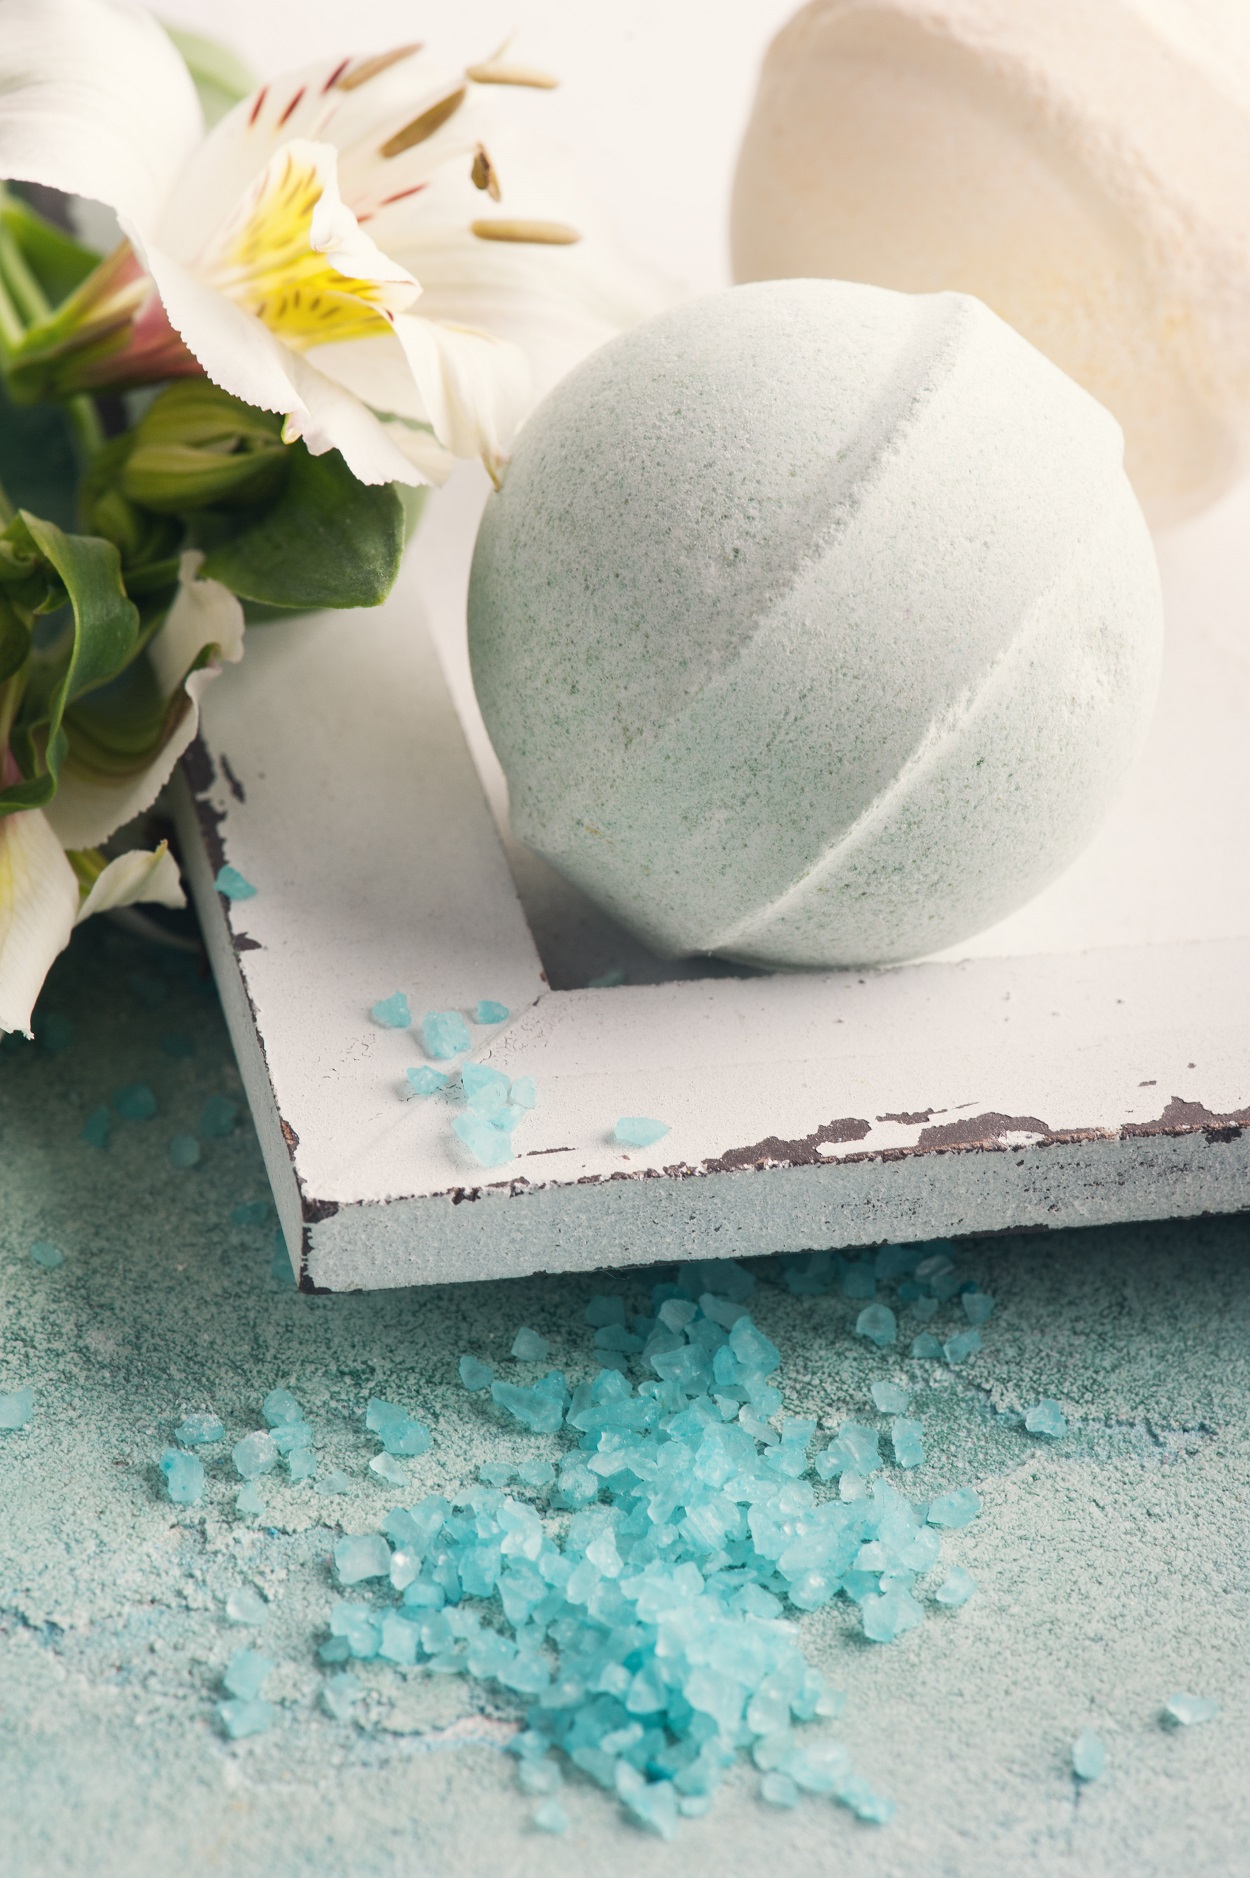 Goat Milk Bath Bomb: Are These Really The Bes …